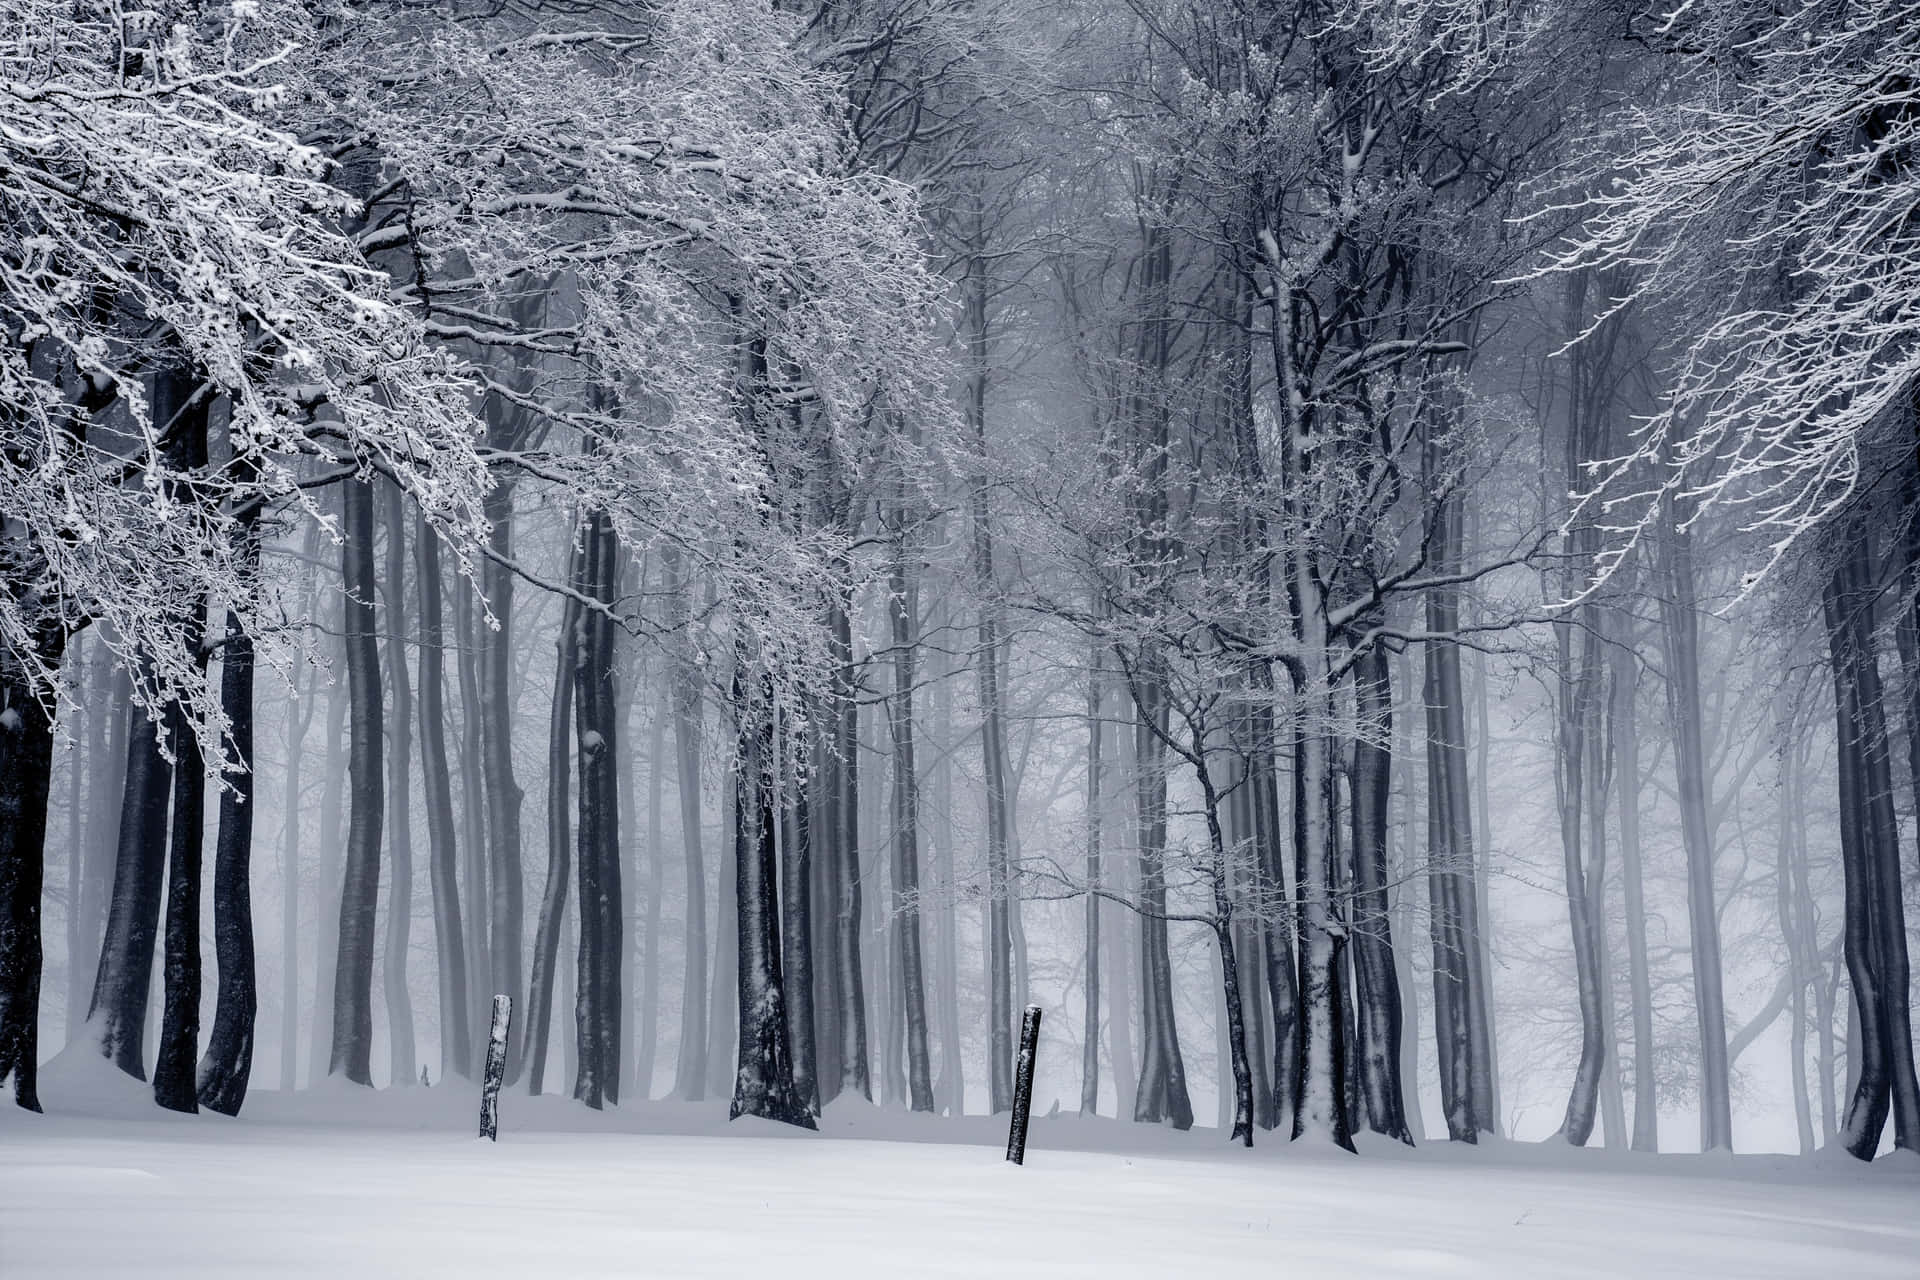 "Brave the chilly conditions for a mesmerizing winter landscape"